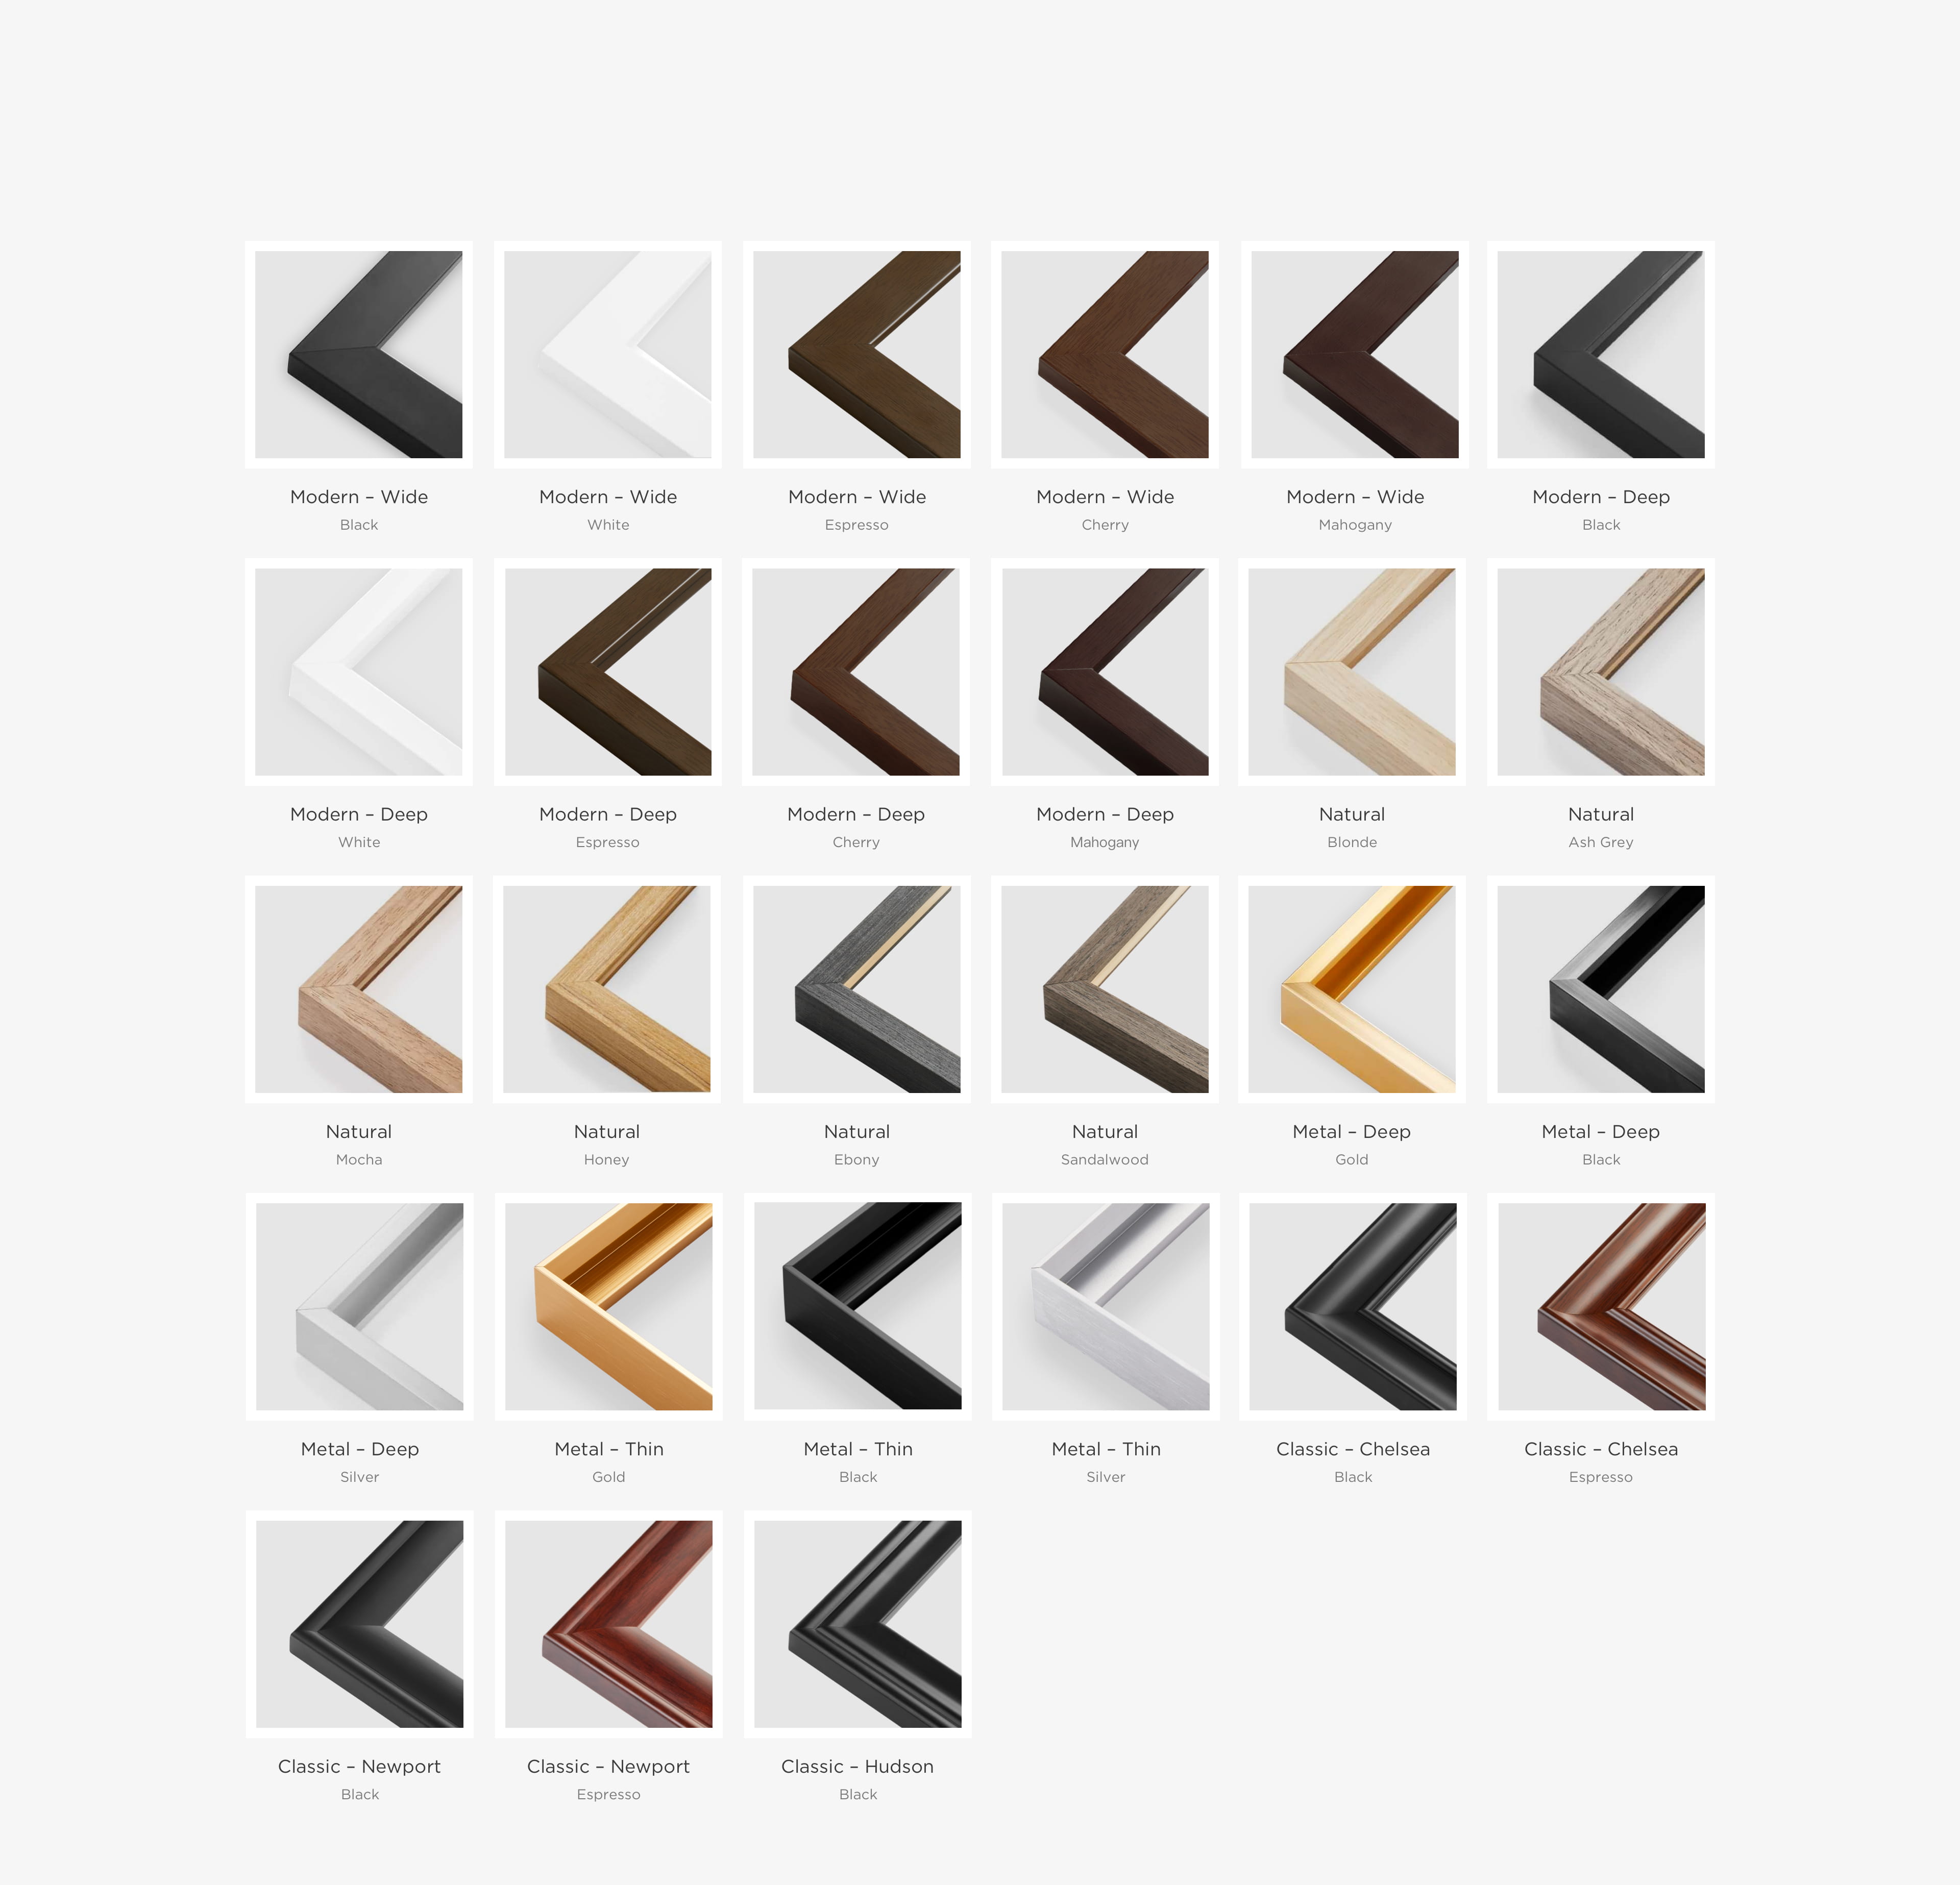 image showing wood frame colors